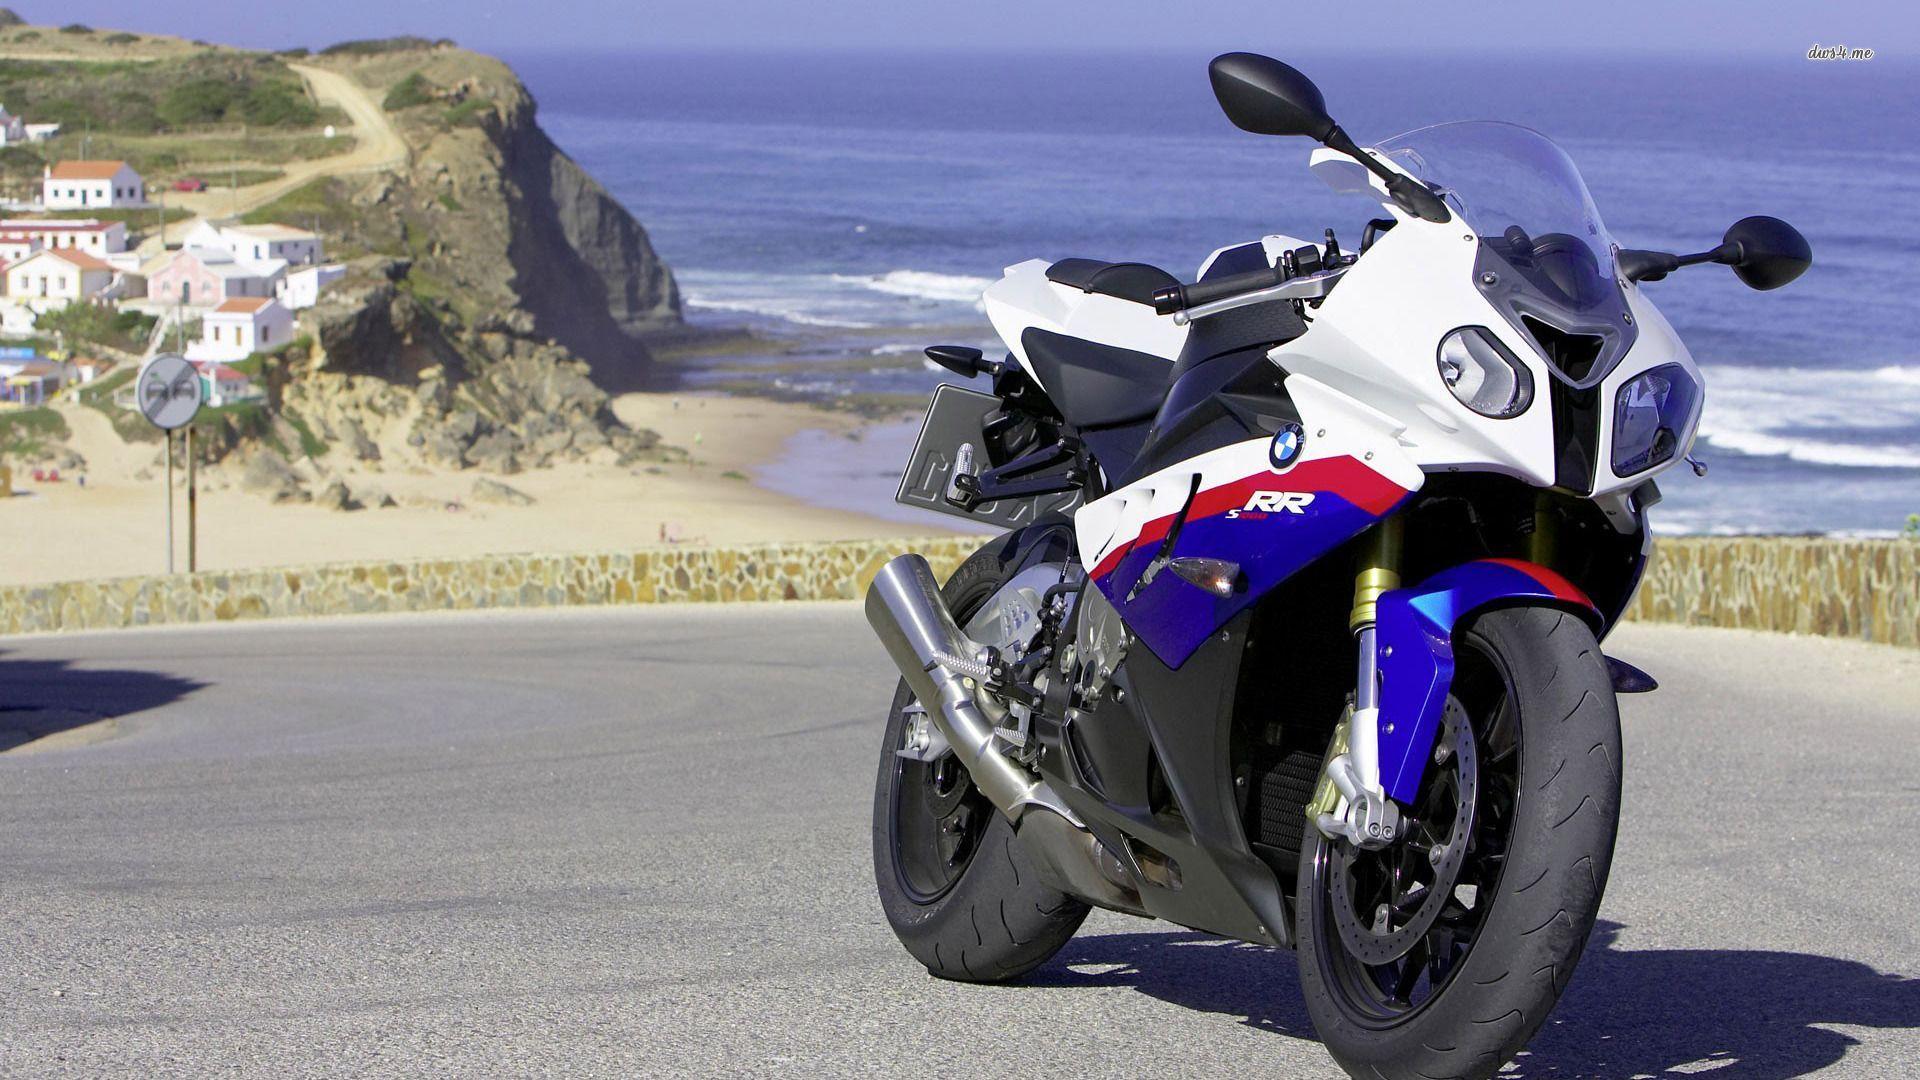 bmw s1000rr 1920x1080 motorcycle wallpaper. All